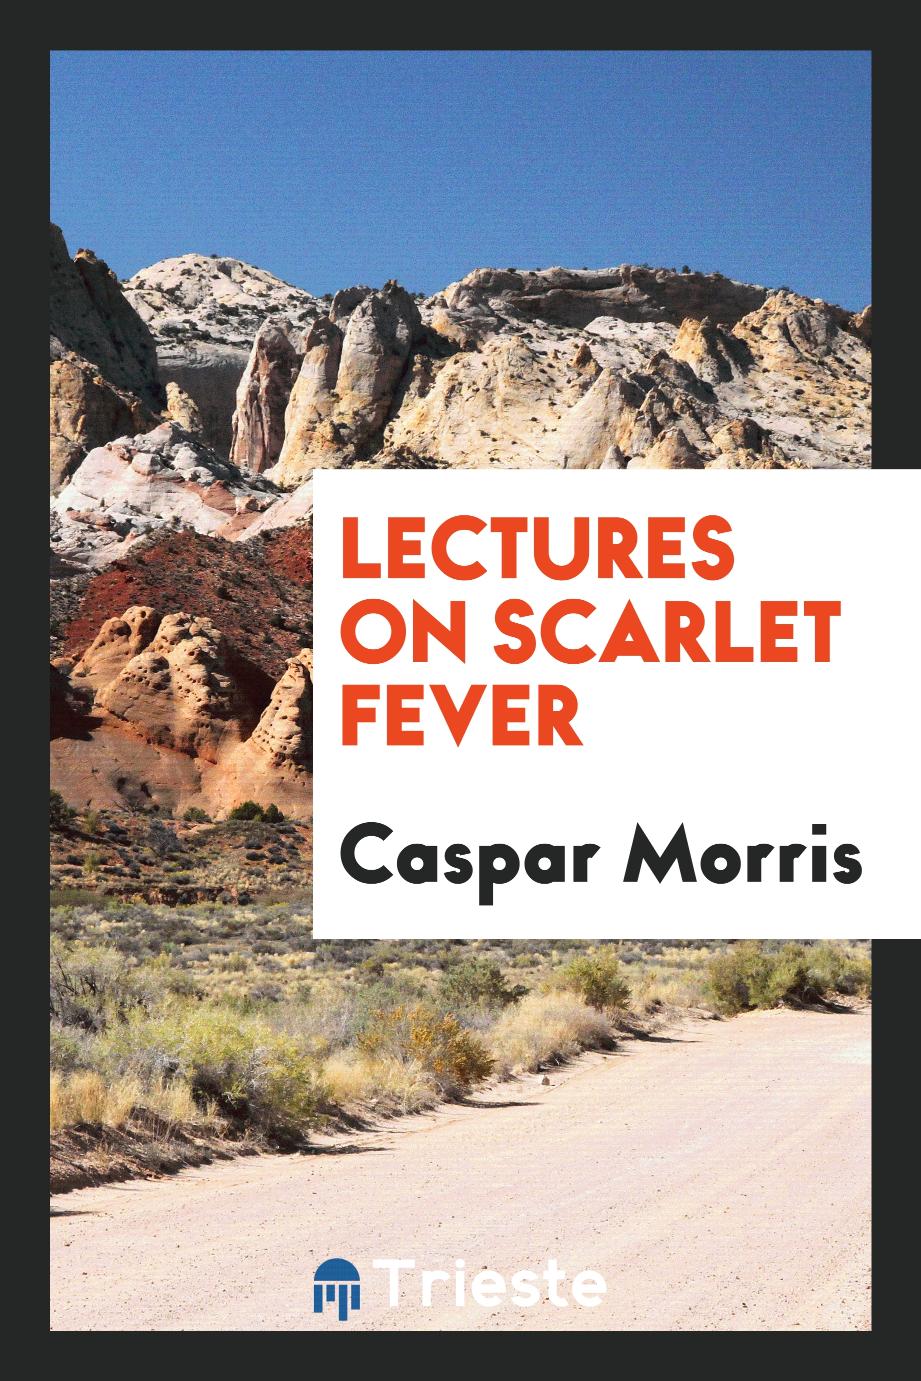 Lectures on Scarlet Fever